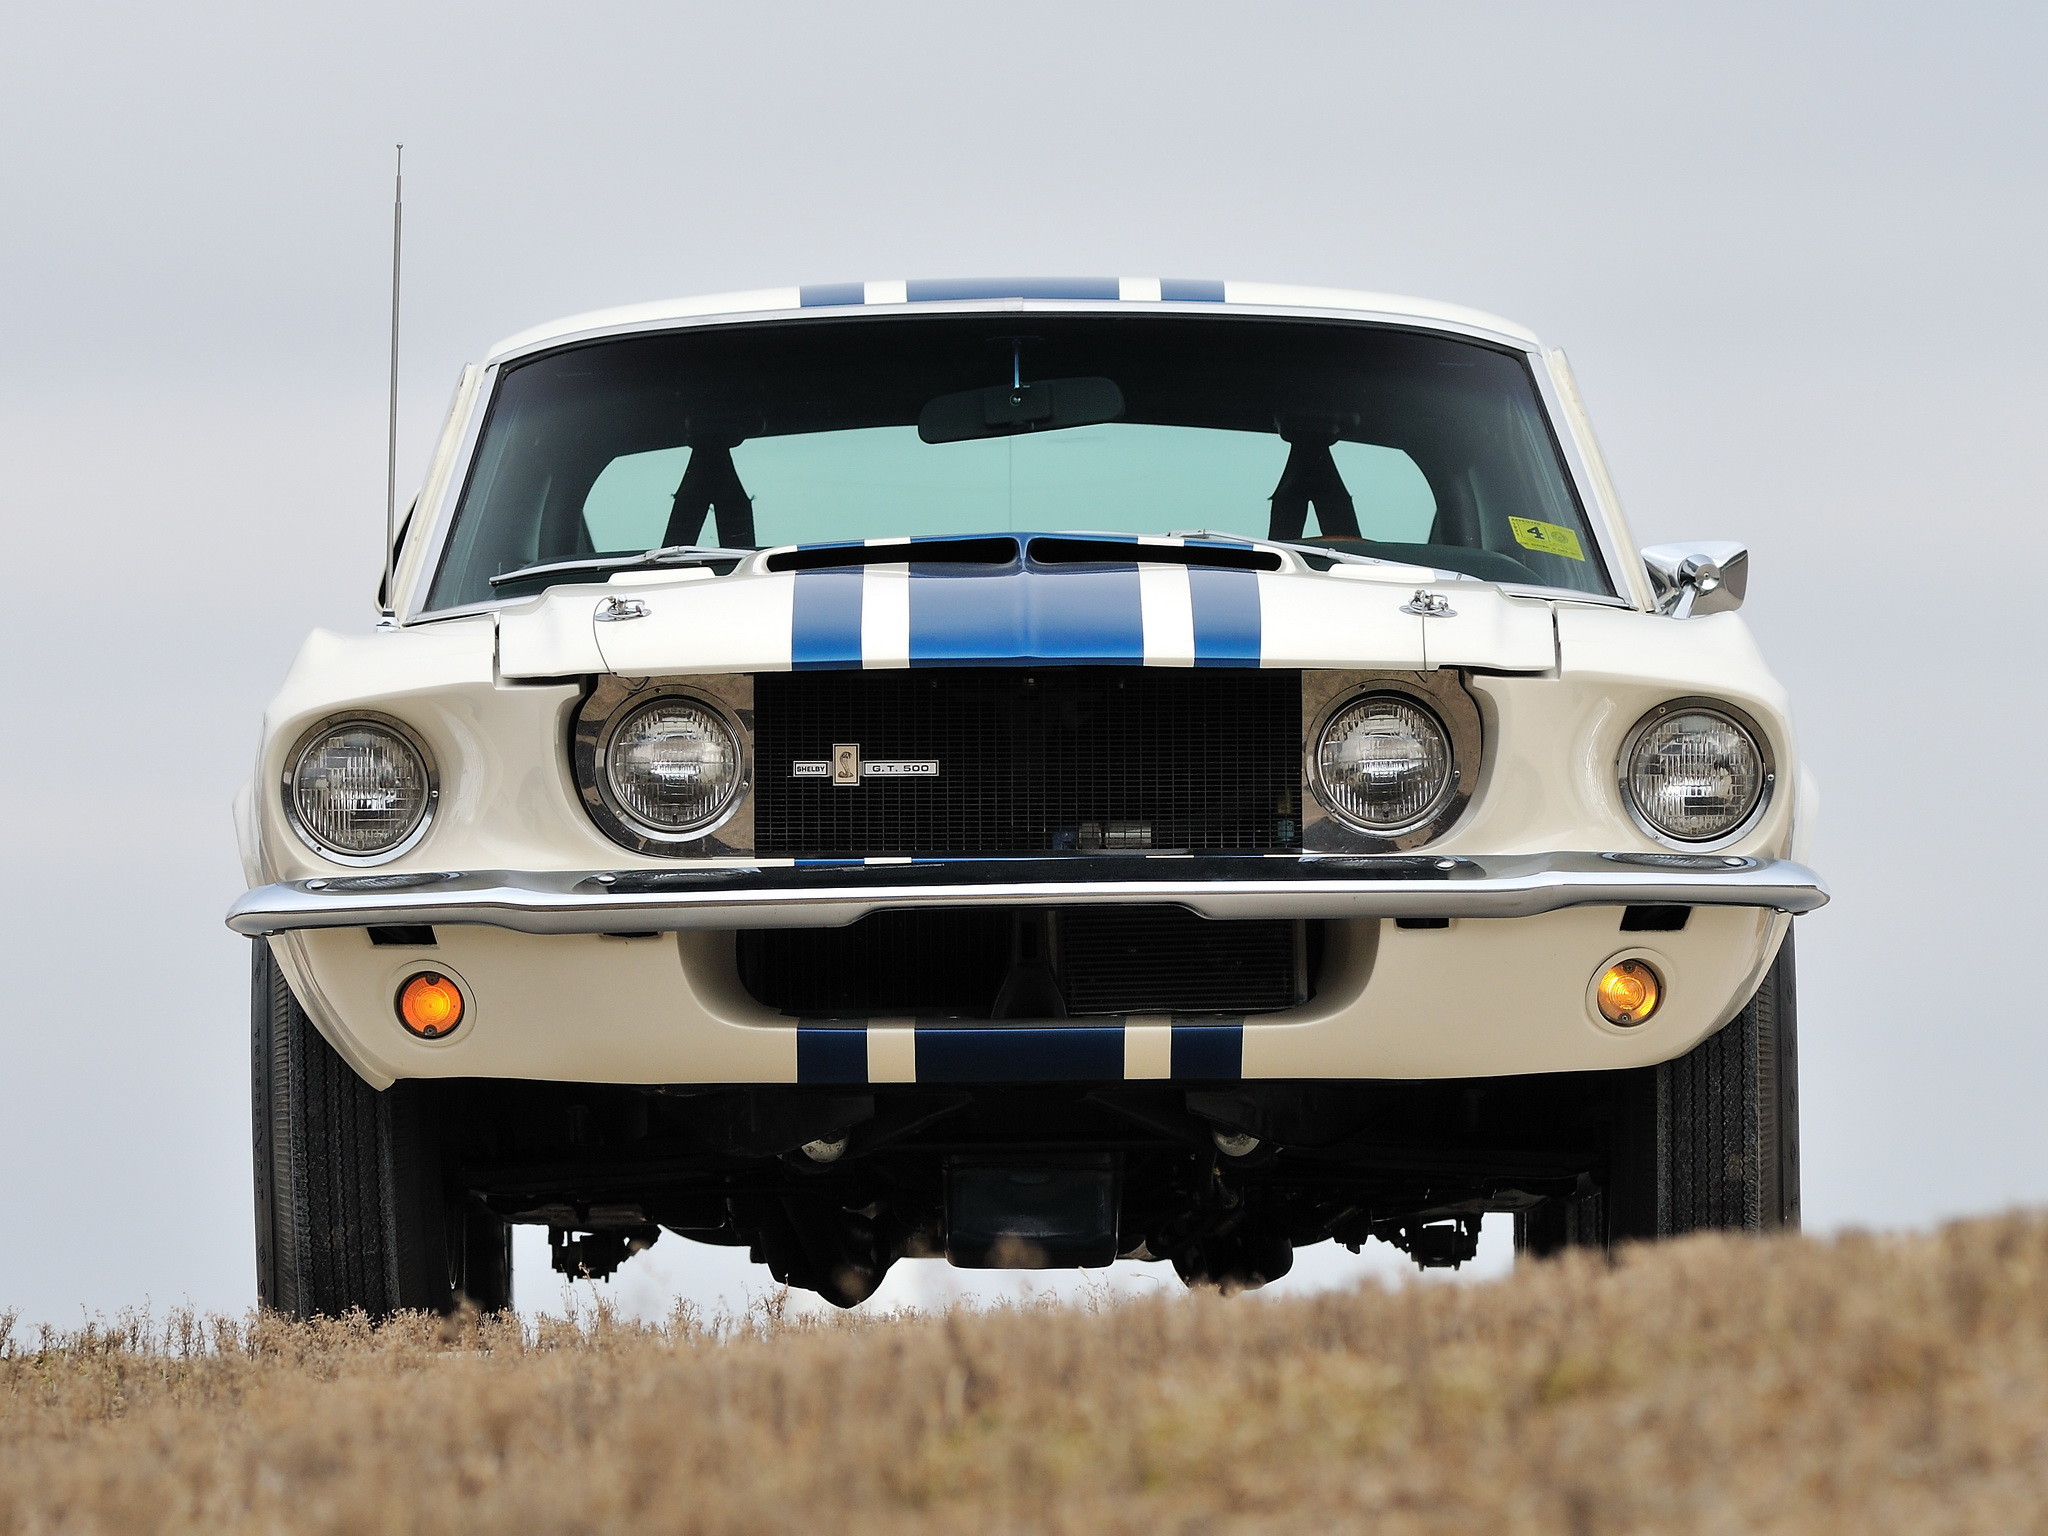 2048x1536 1967 Shelby GT500 Super-Snake ford mustang classic muscle e wallpaper |   | 94501 | WallpaperUP